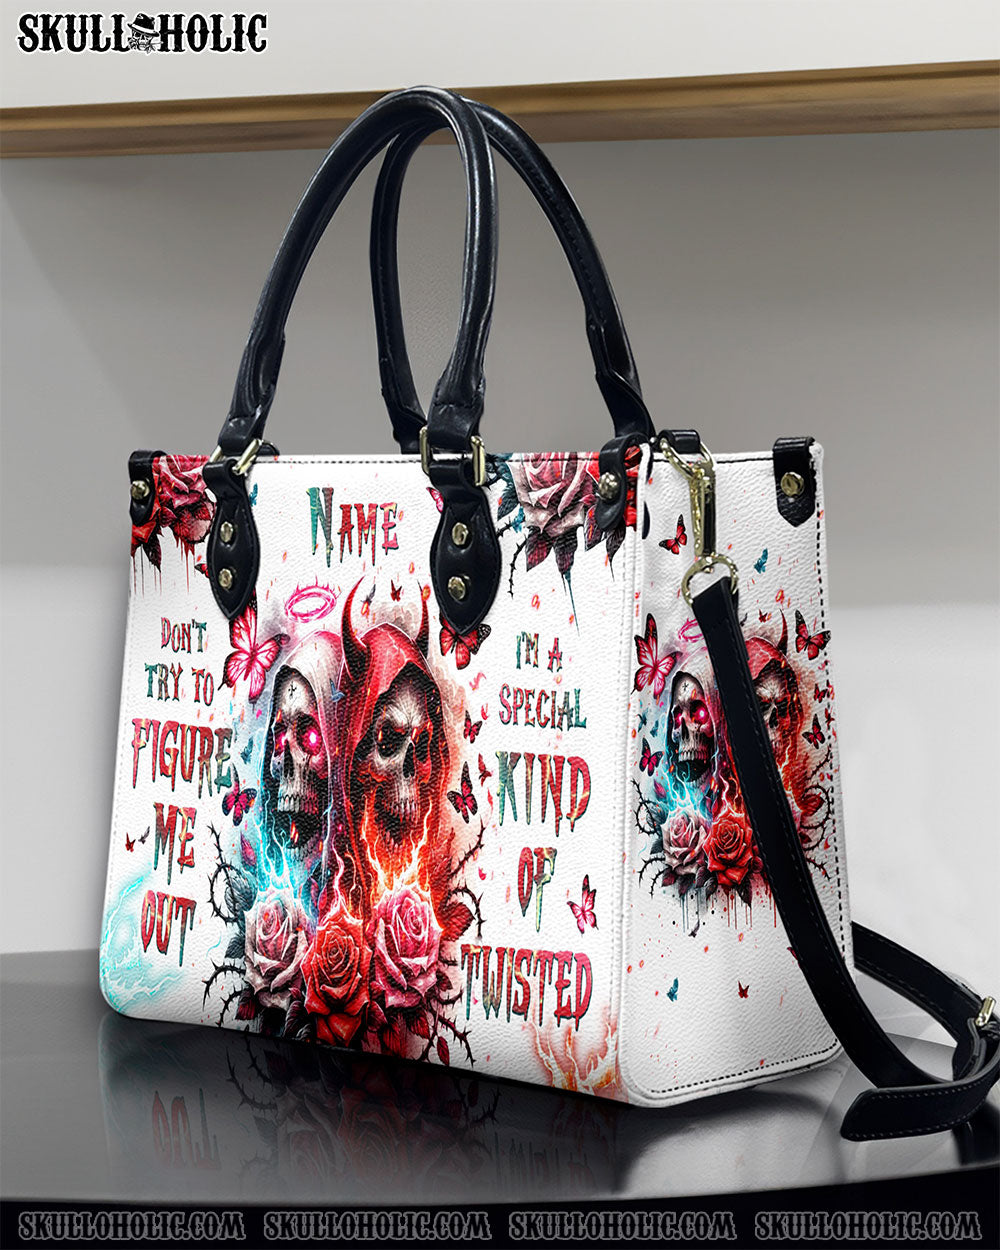 DON'T TRY TO FIGURE ME OUT SKULL LEATHER HANDBAG - TLPQ2503243